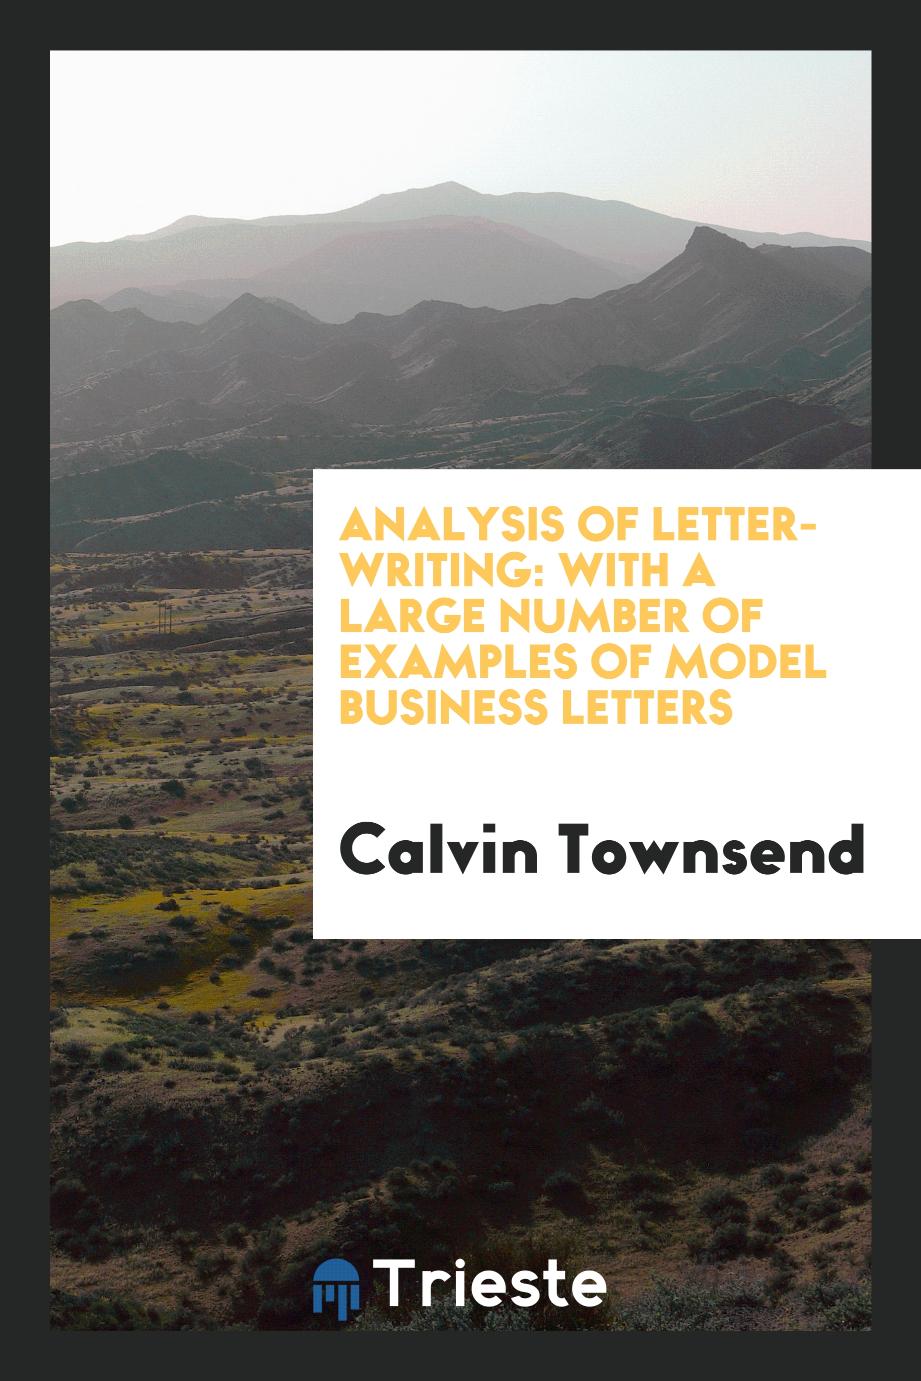 Analysis of letter-writing: with a large number of examples of model business letters